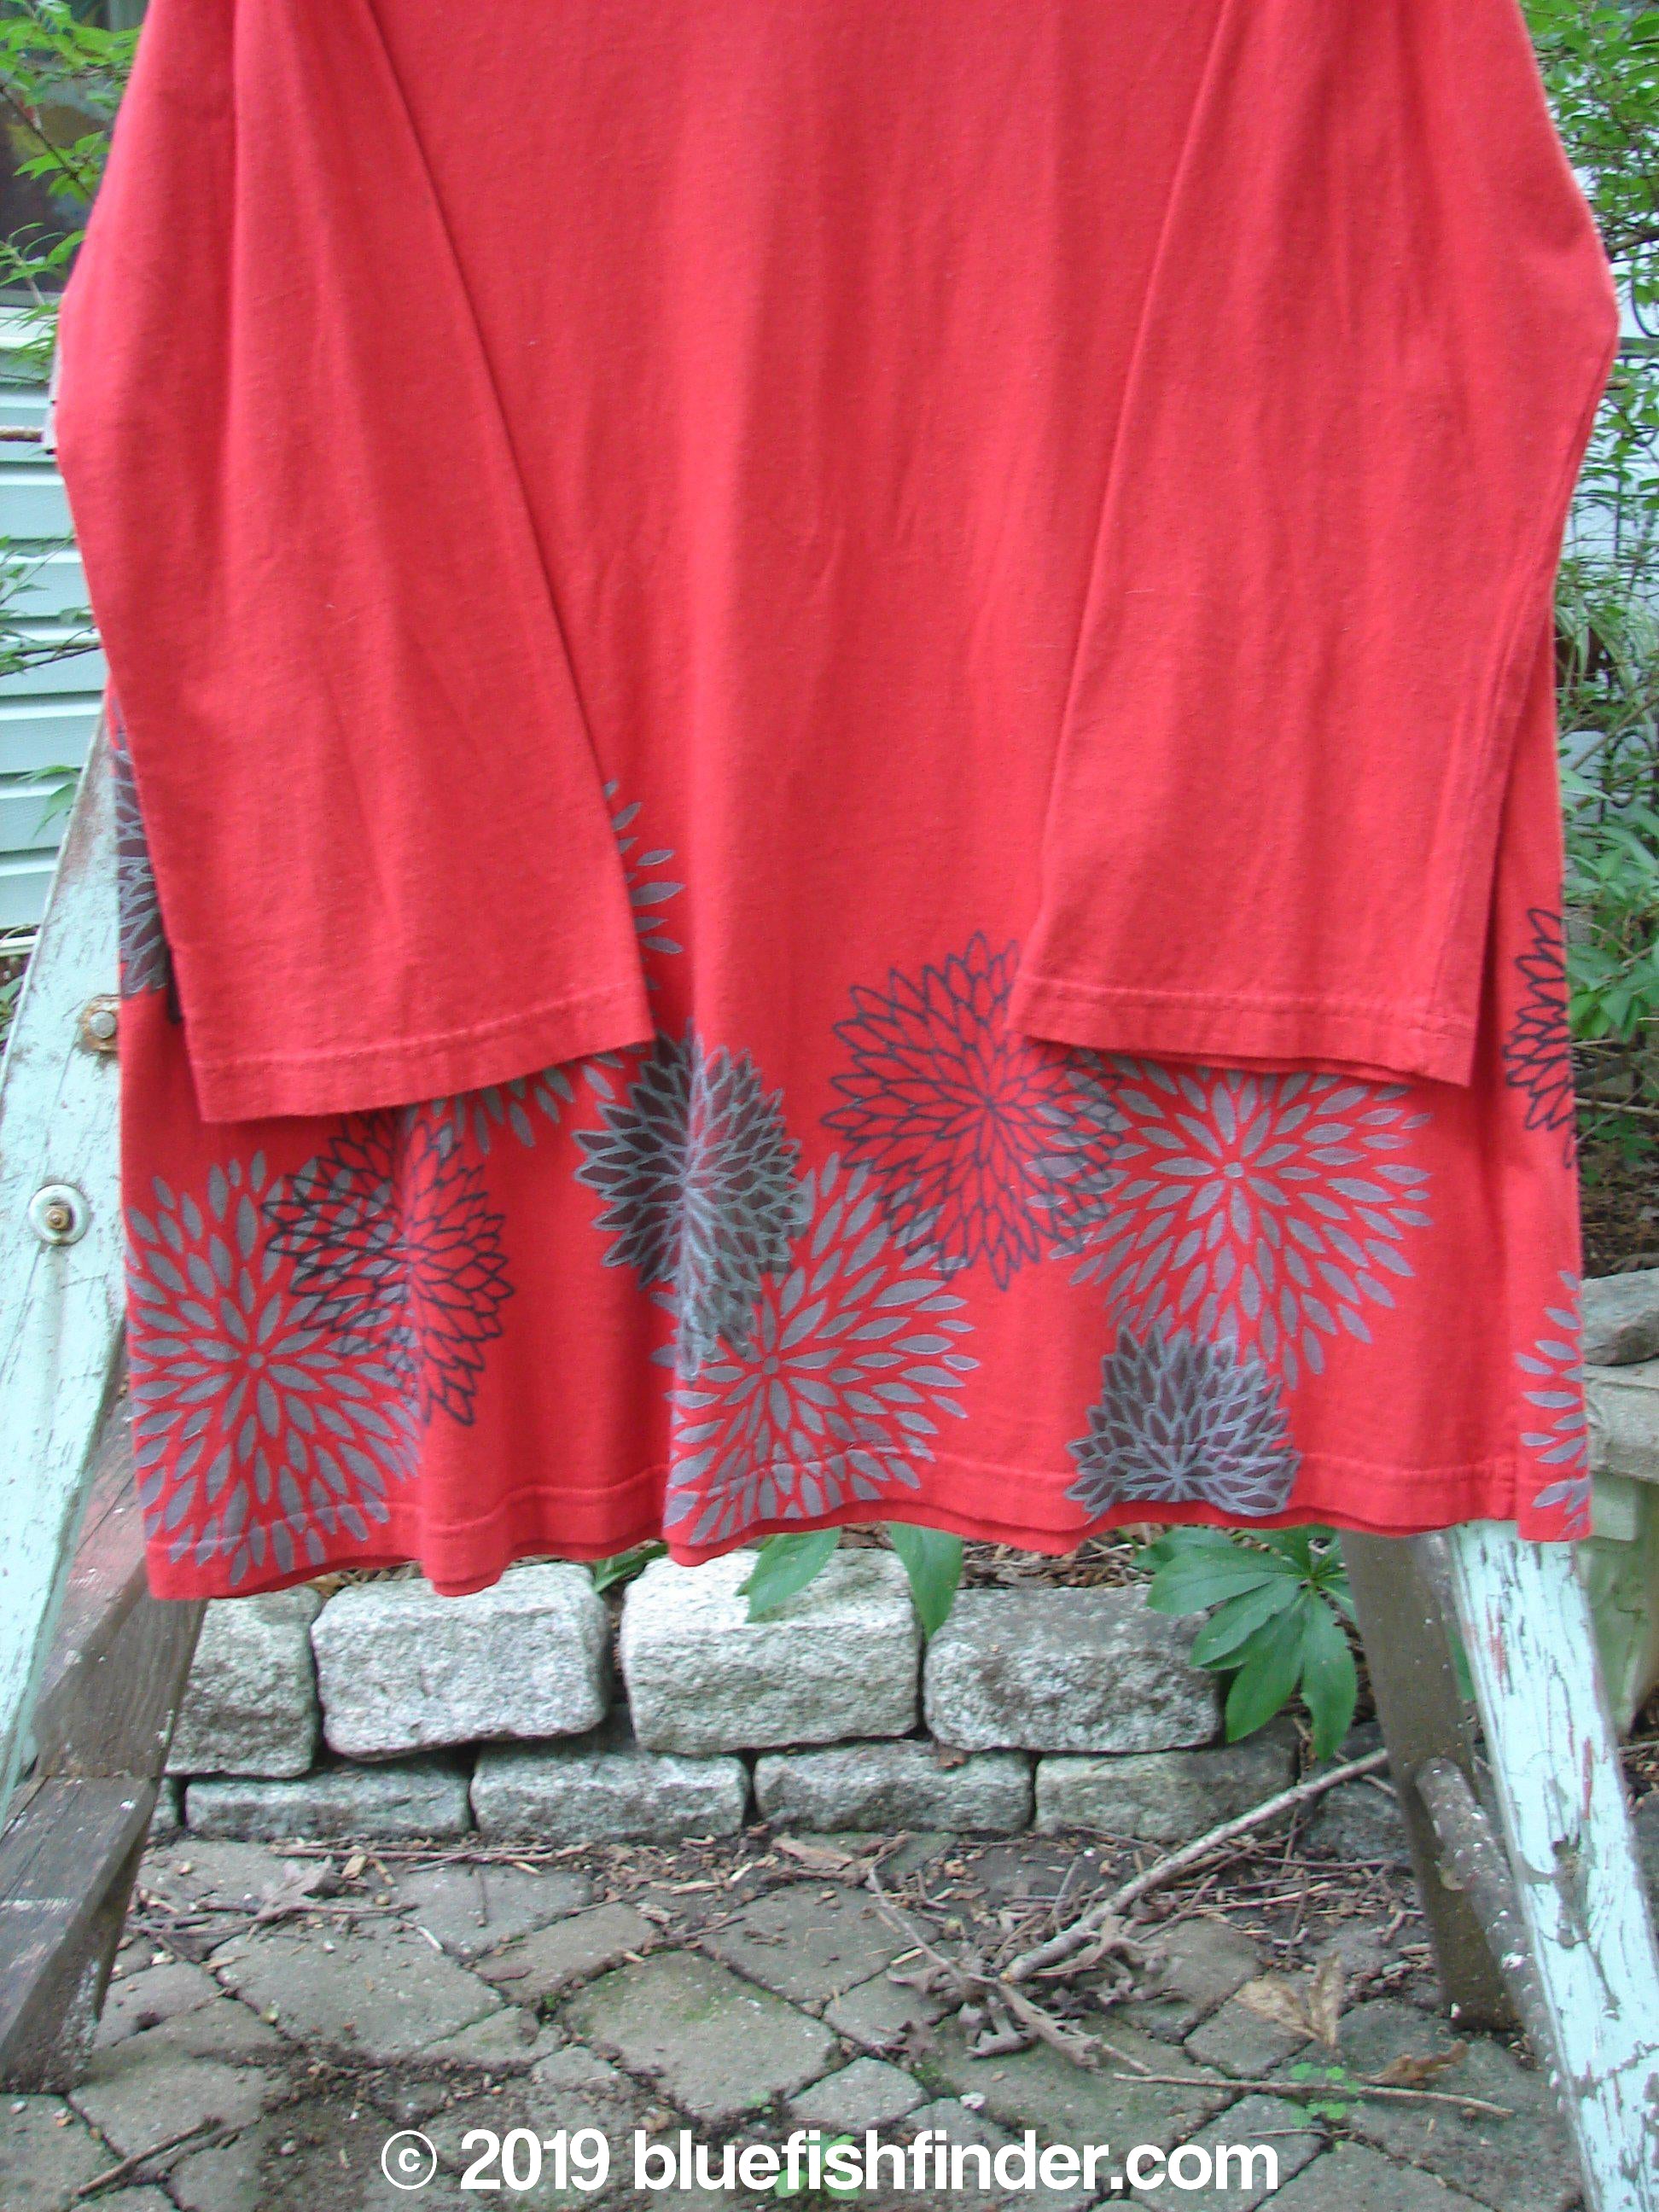 Barclay NWT Reverie Top: A red shirt with grey flowers on it. Sweet boat neckline, drop shoulders, chrysanthemum theme paint. A-line shape, made from organic cotton. Size 1.